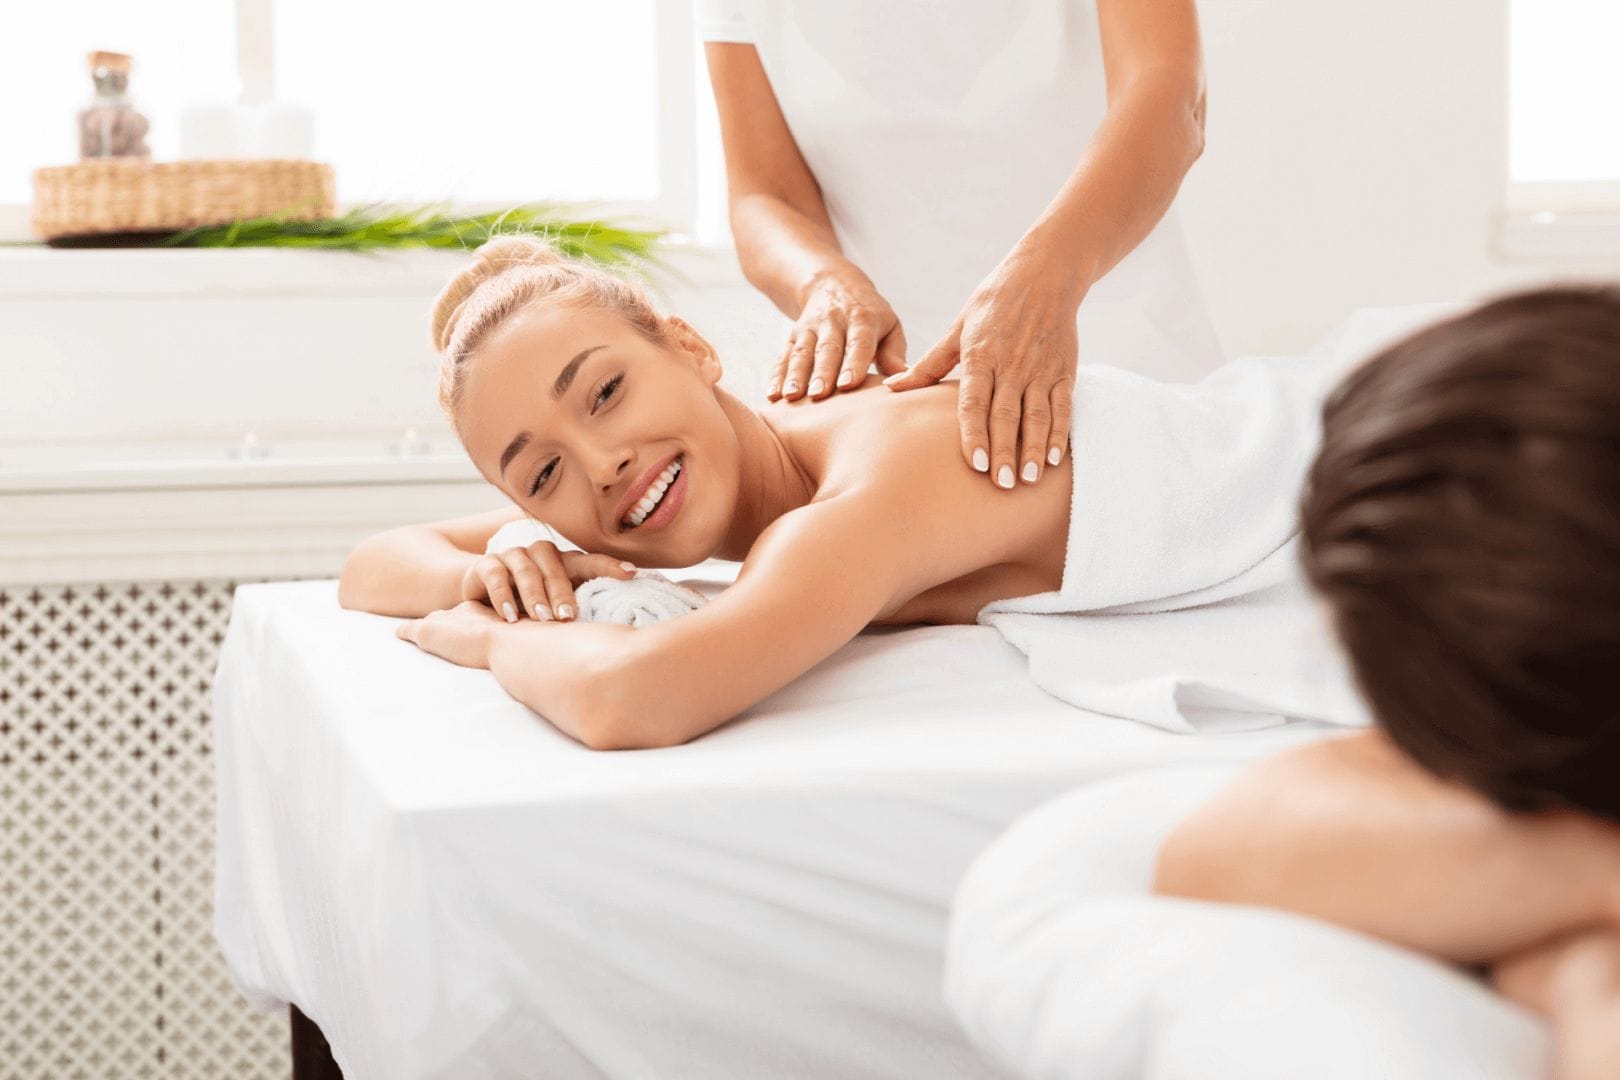 wife-smiling-to-husband-during-couples-massage-rel-U3XWU2A